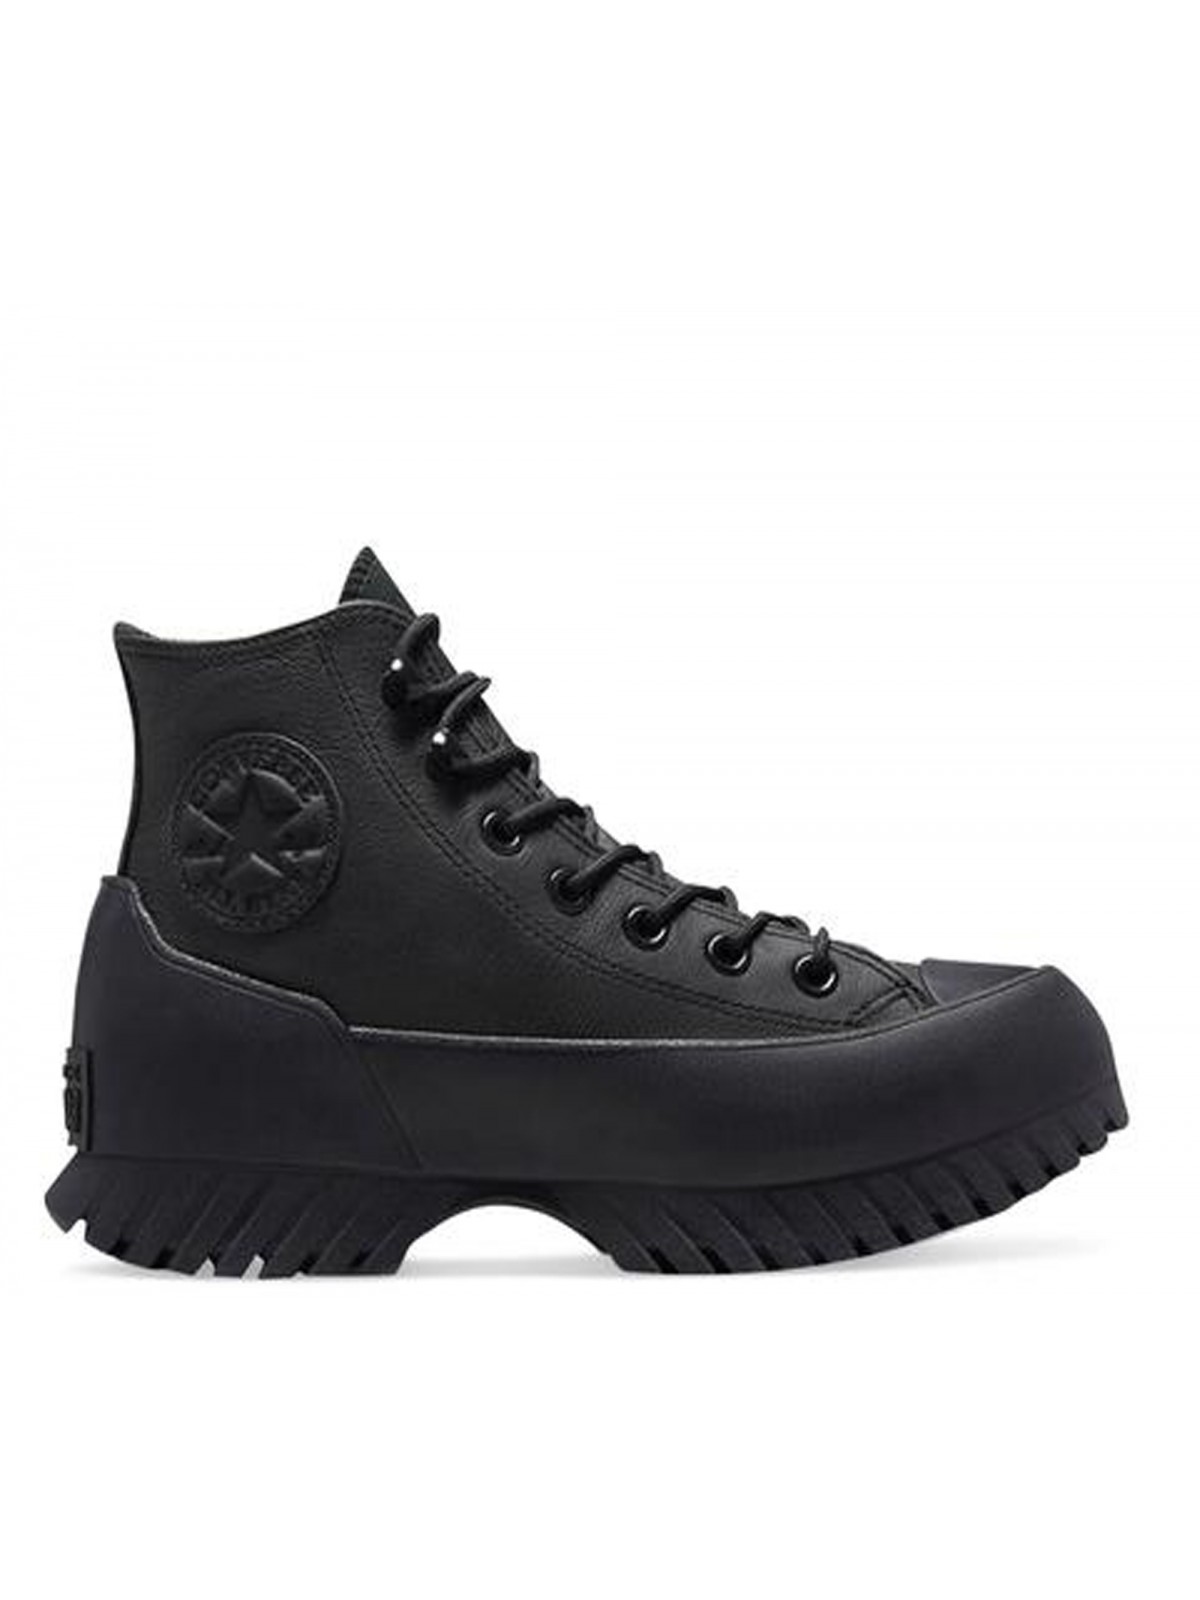 Converse Chuck Taylor All Star Lugged Winter 2.0 Cold Fusion cuir plateforme monochrome noir